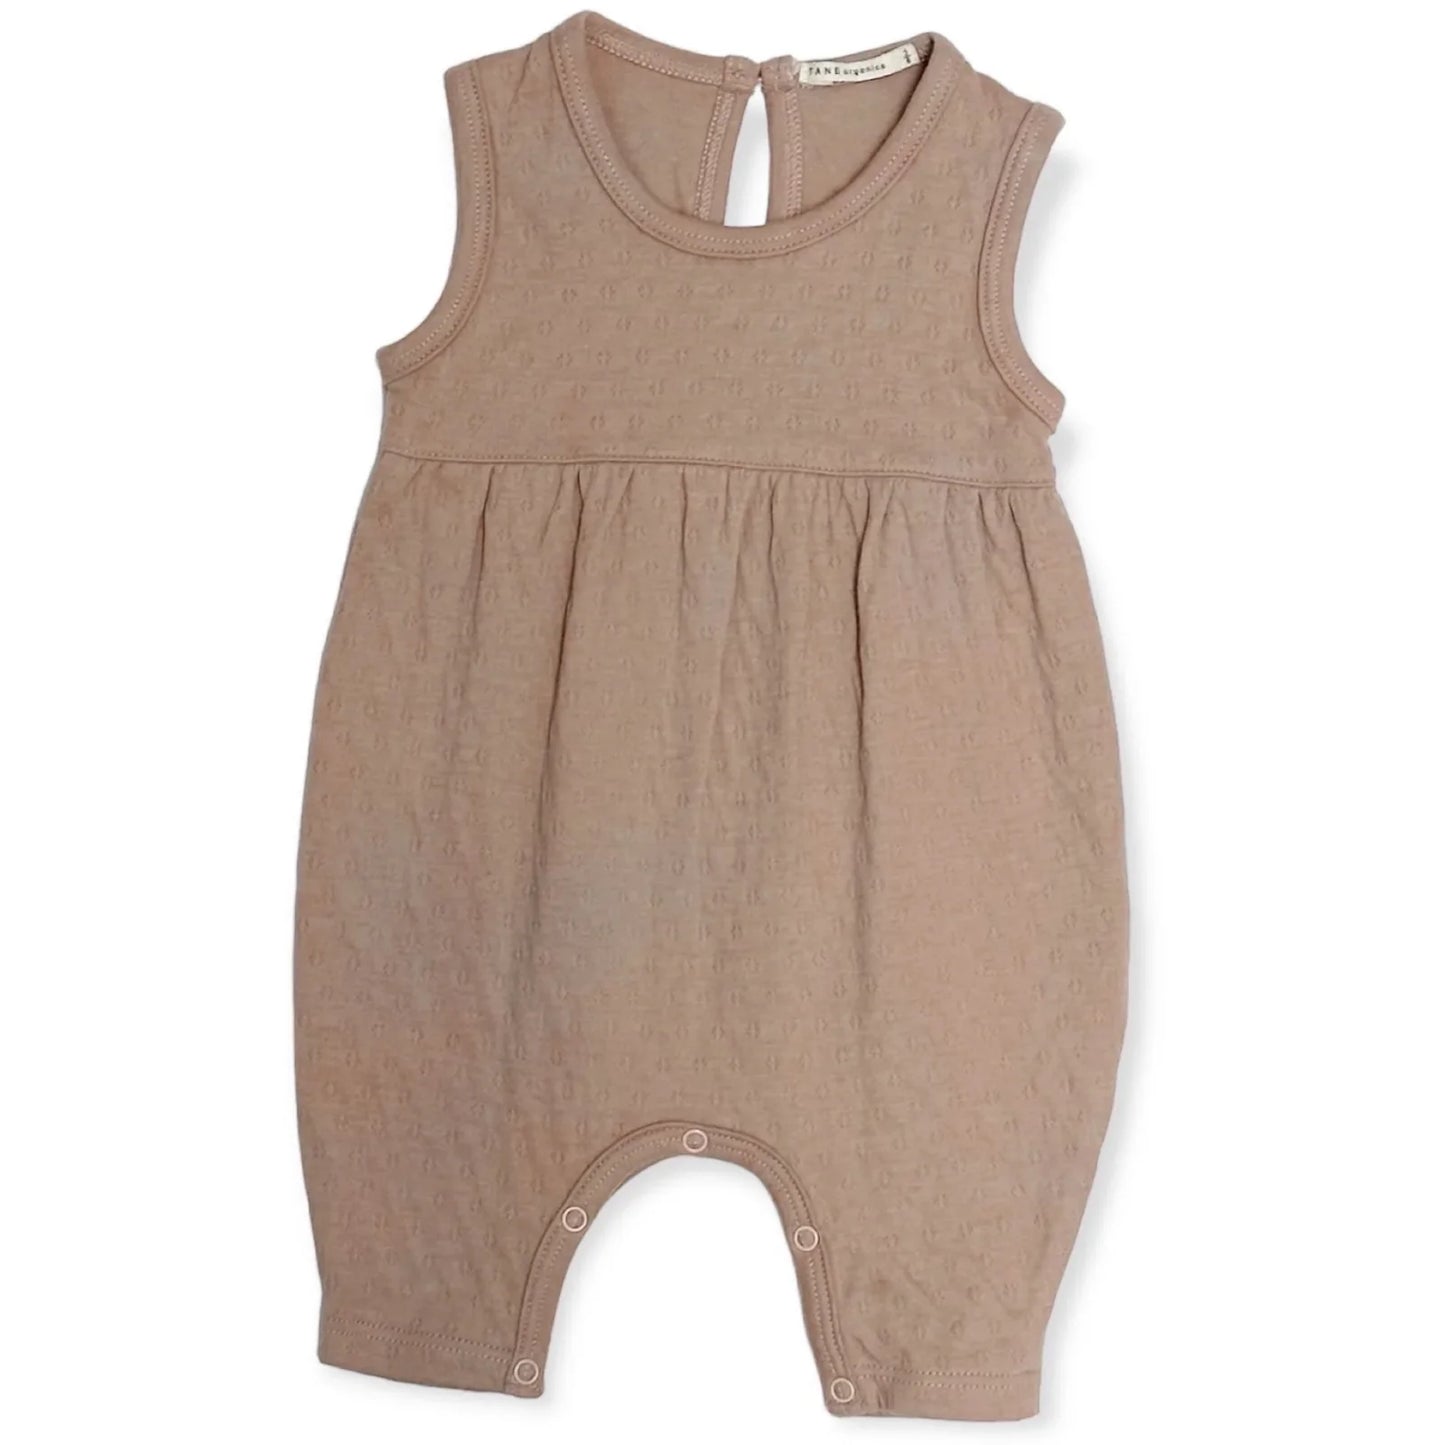 Tane Organics pointelle bubble coverall in dusk